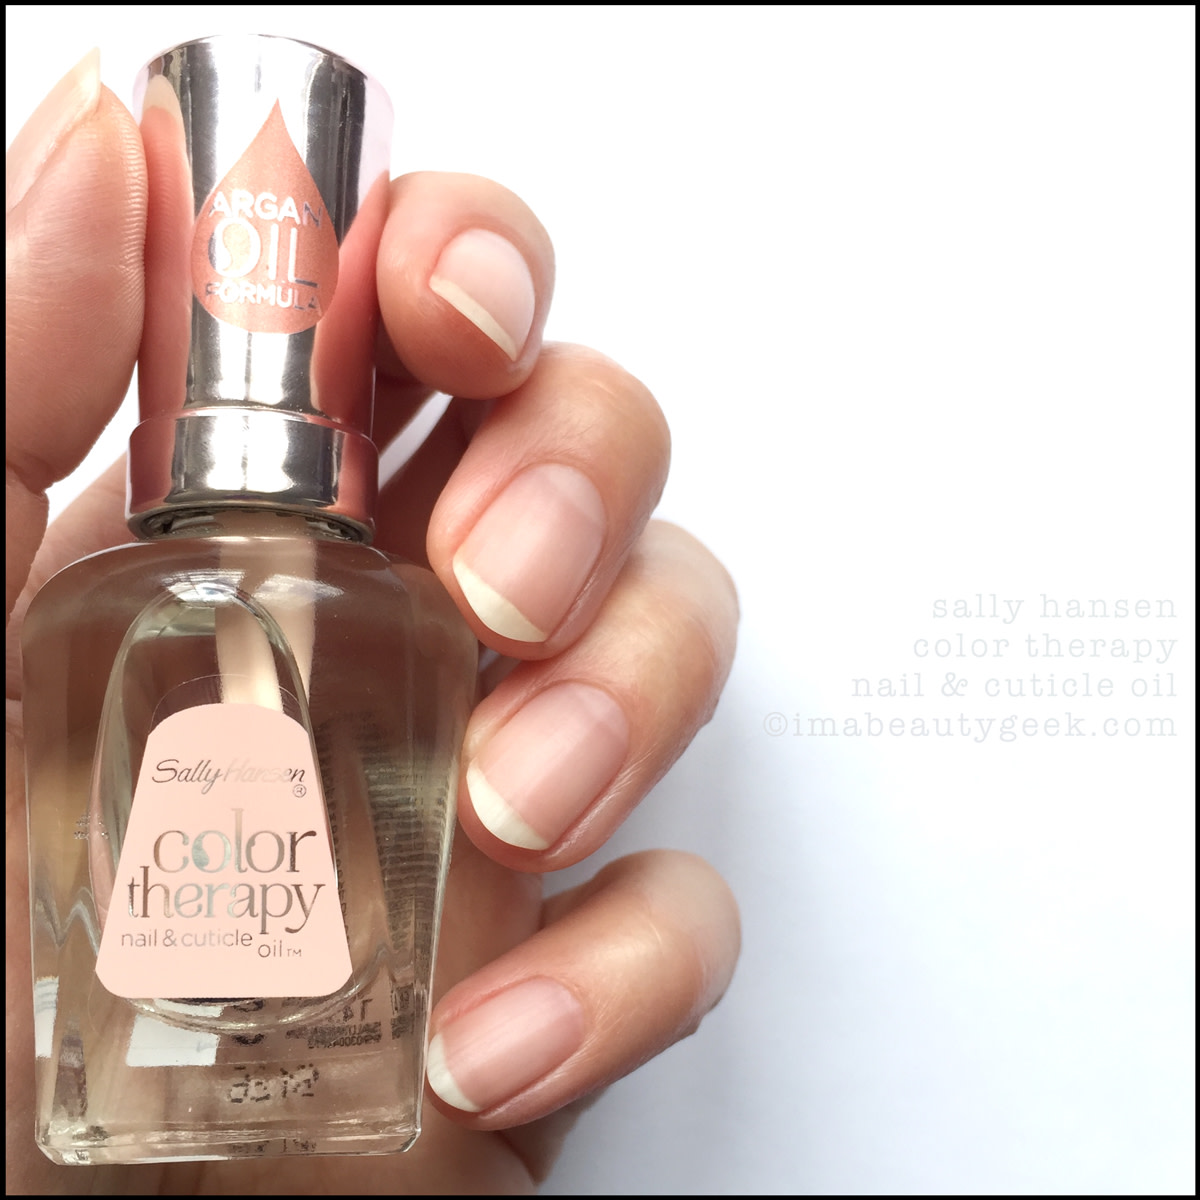 Sally Hansen Color Therapy Nail and Cuticle Oil